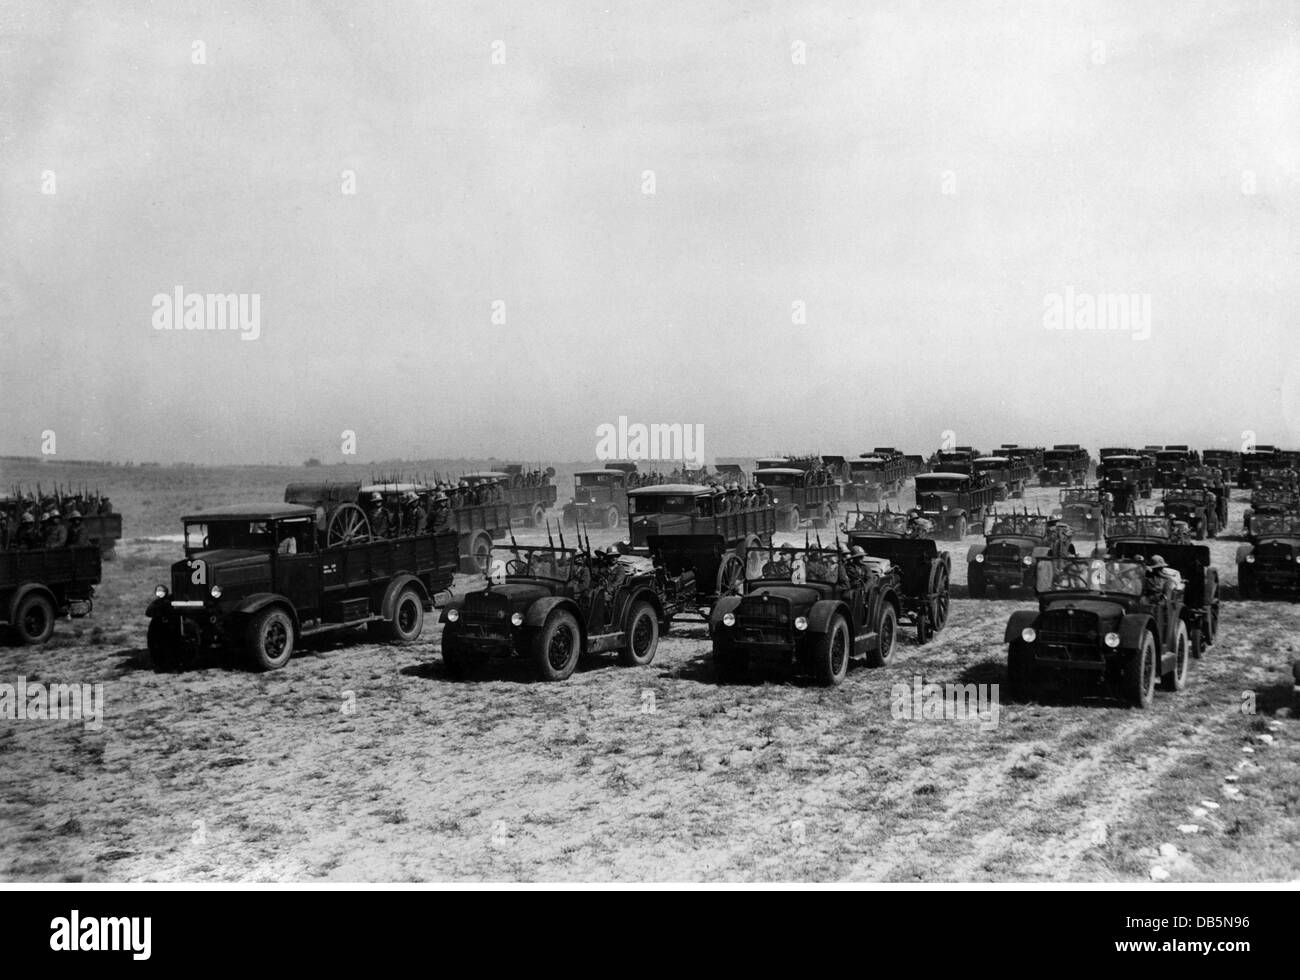 military, Italy, artillery, motorised Italian artillery during a parade in Libya, 13.4.1939, on occasion of a visit of Field Marshal Hermann Goering, Additional-Rights-Clearences-Not Available Stock Photo